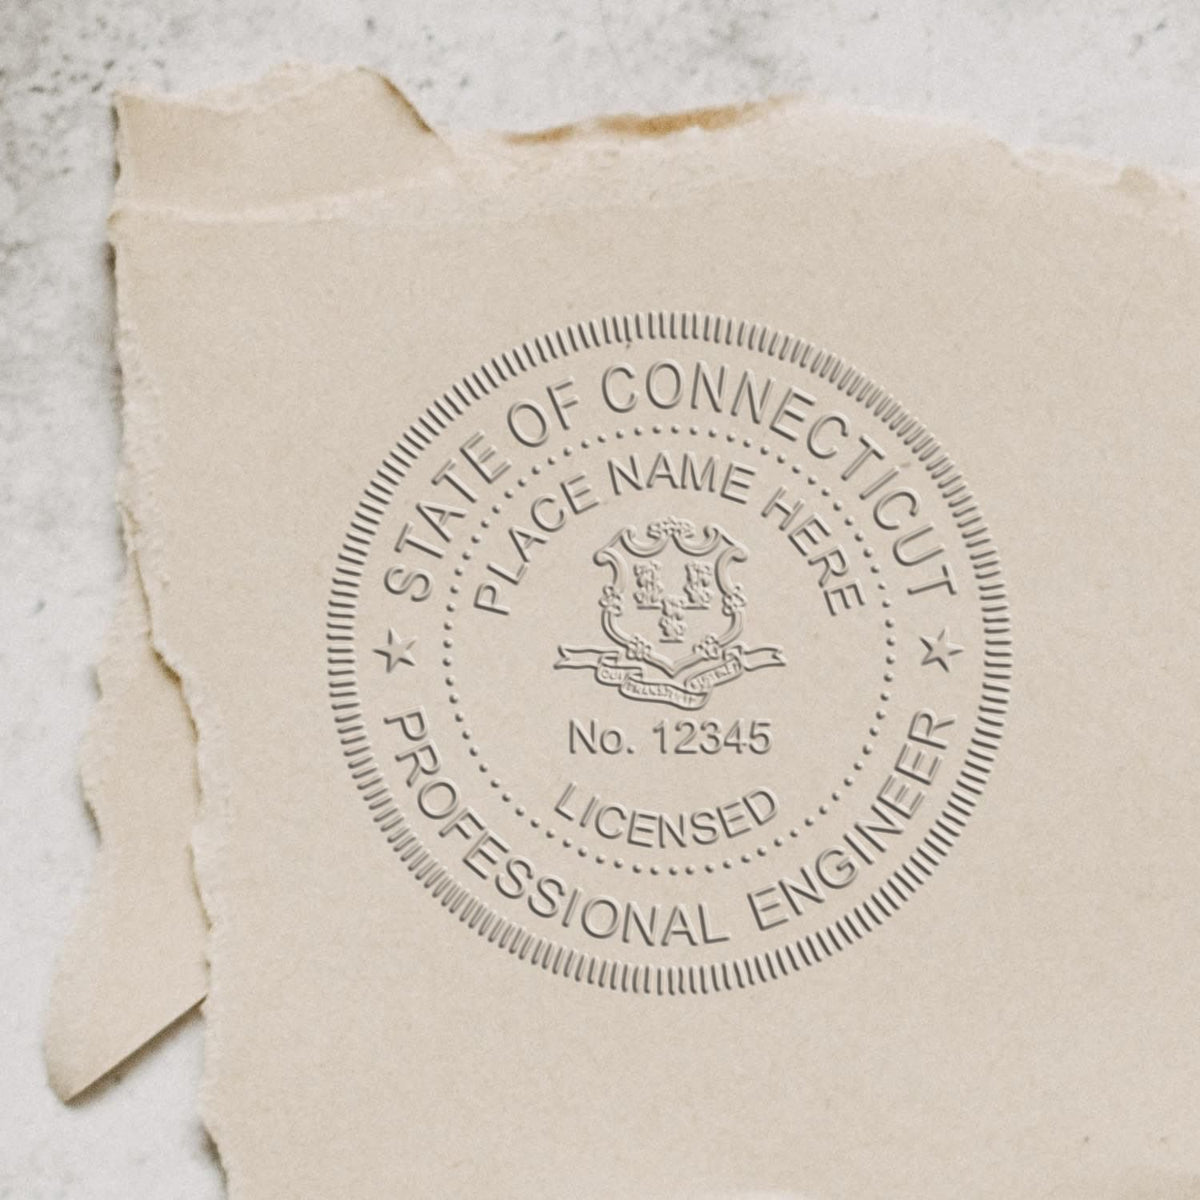 An alternative view of the State of Connecticut Extended Long Reach Engineer Seal stamped on a sheet of paper showing the image in use